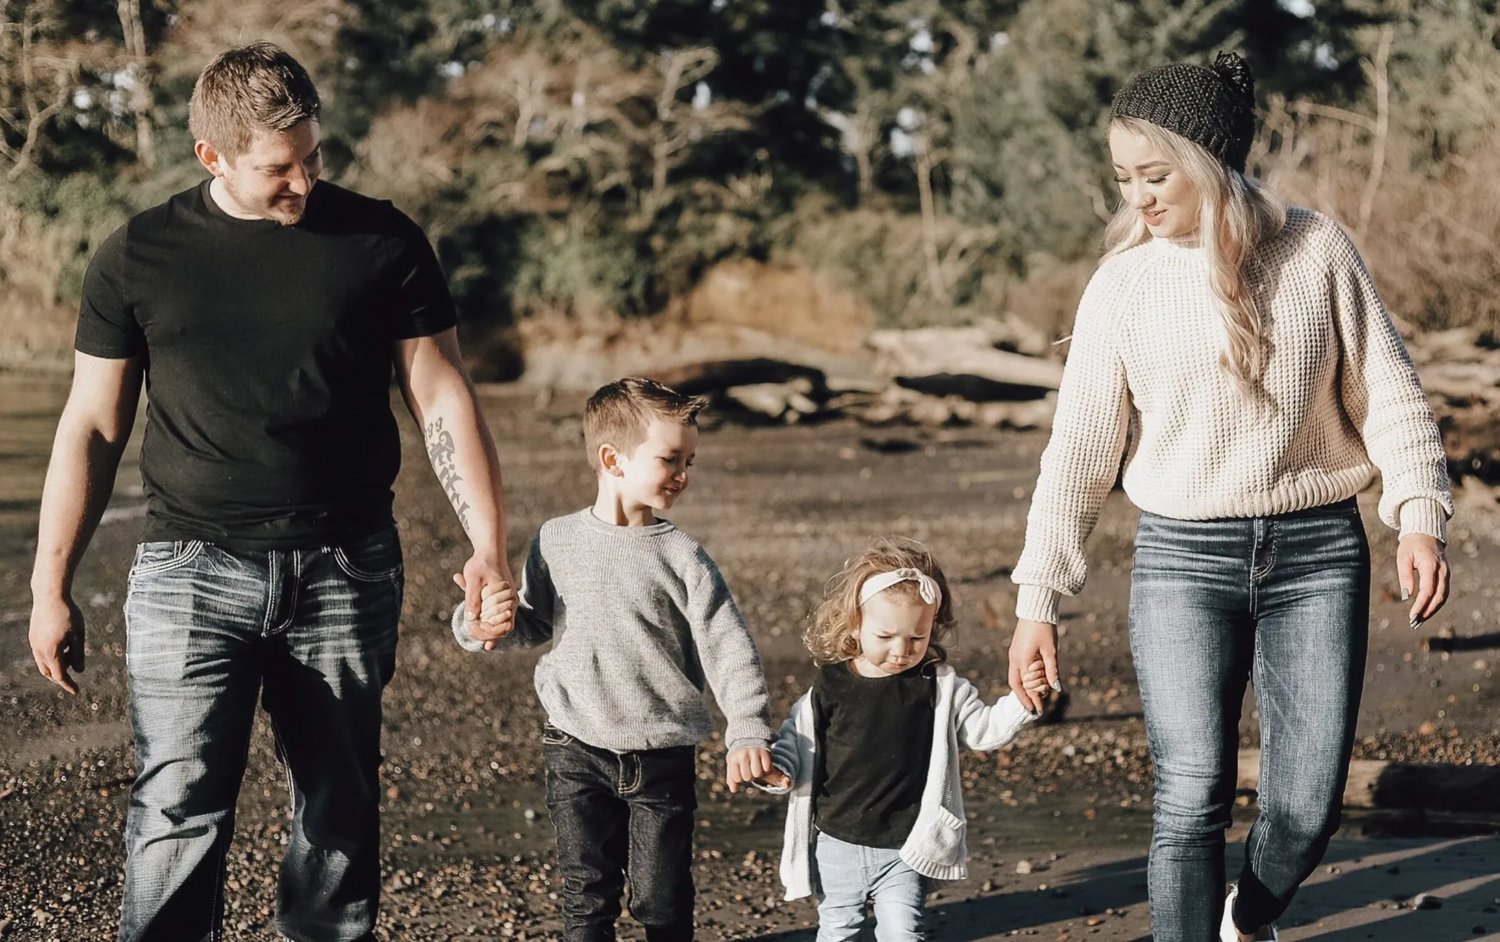 Bryson Fitch left behind a young family when he was lost at sea Feb. 5: son Ryder, eldest daughter Paisley and wife McKenzie Salas. His youngest daughter, 5-month-old Capri, is not pictured here.